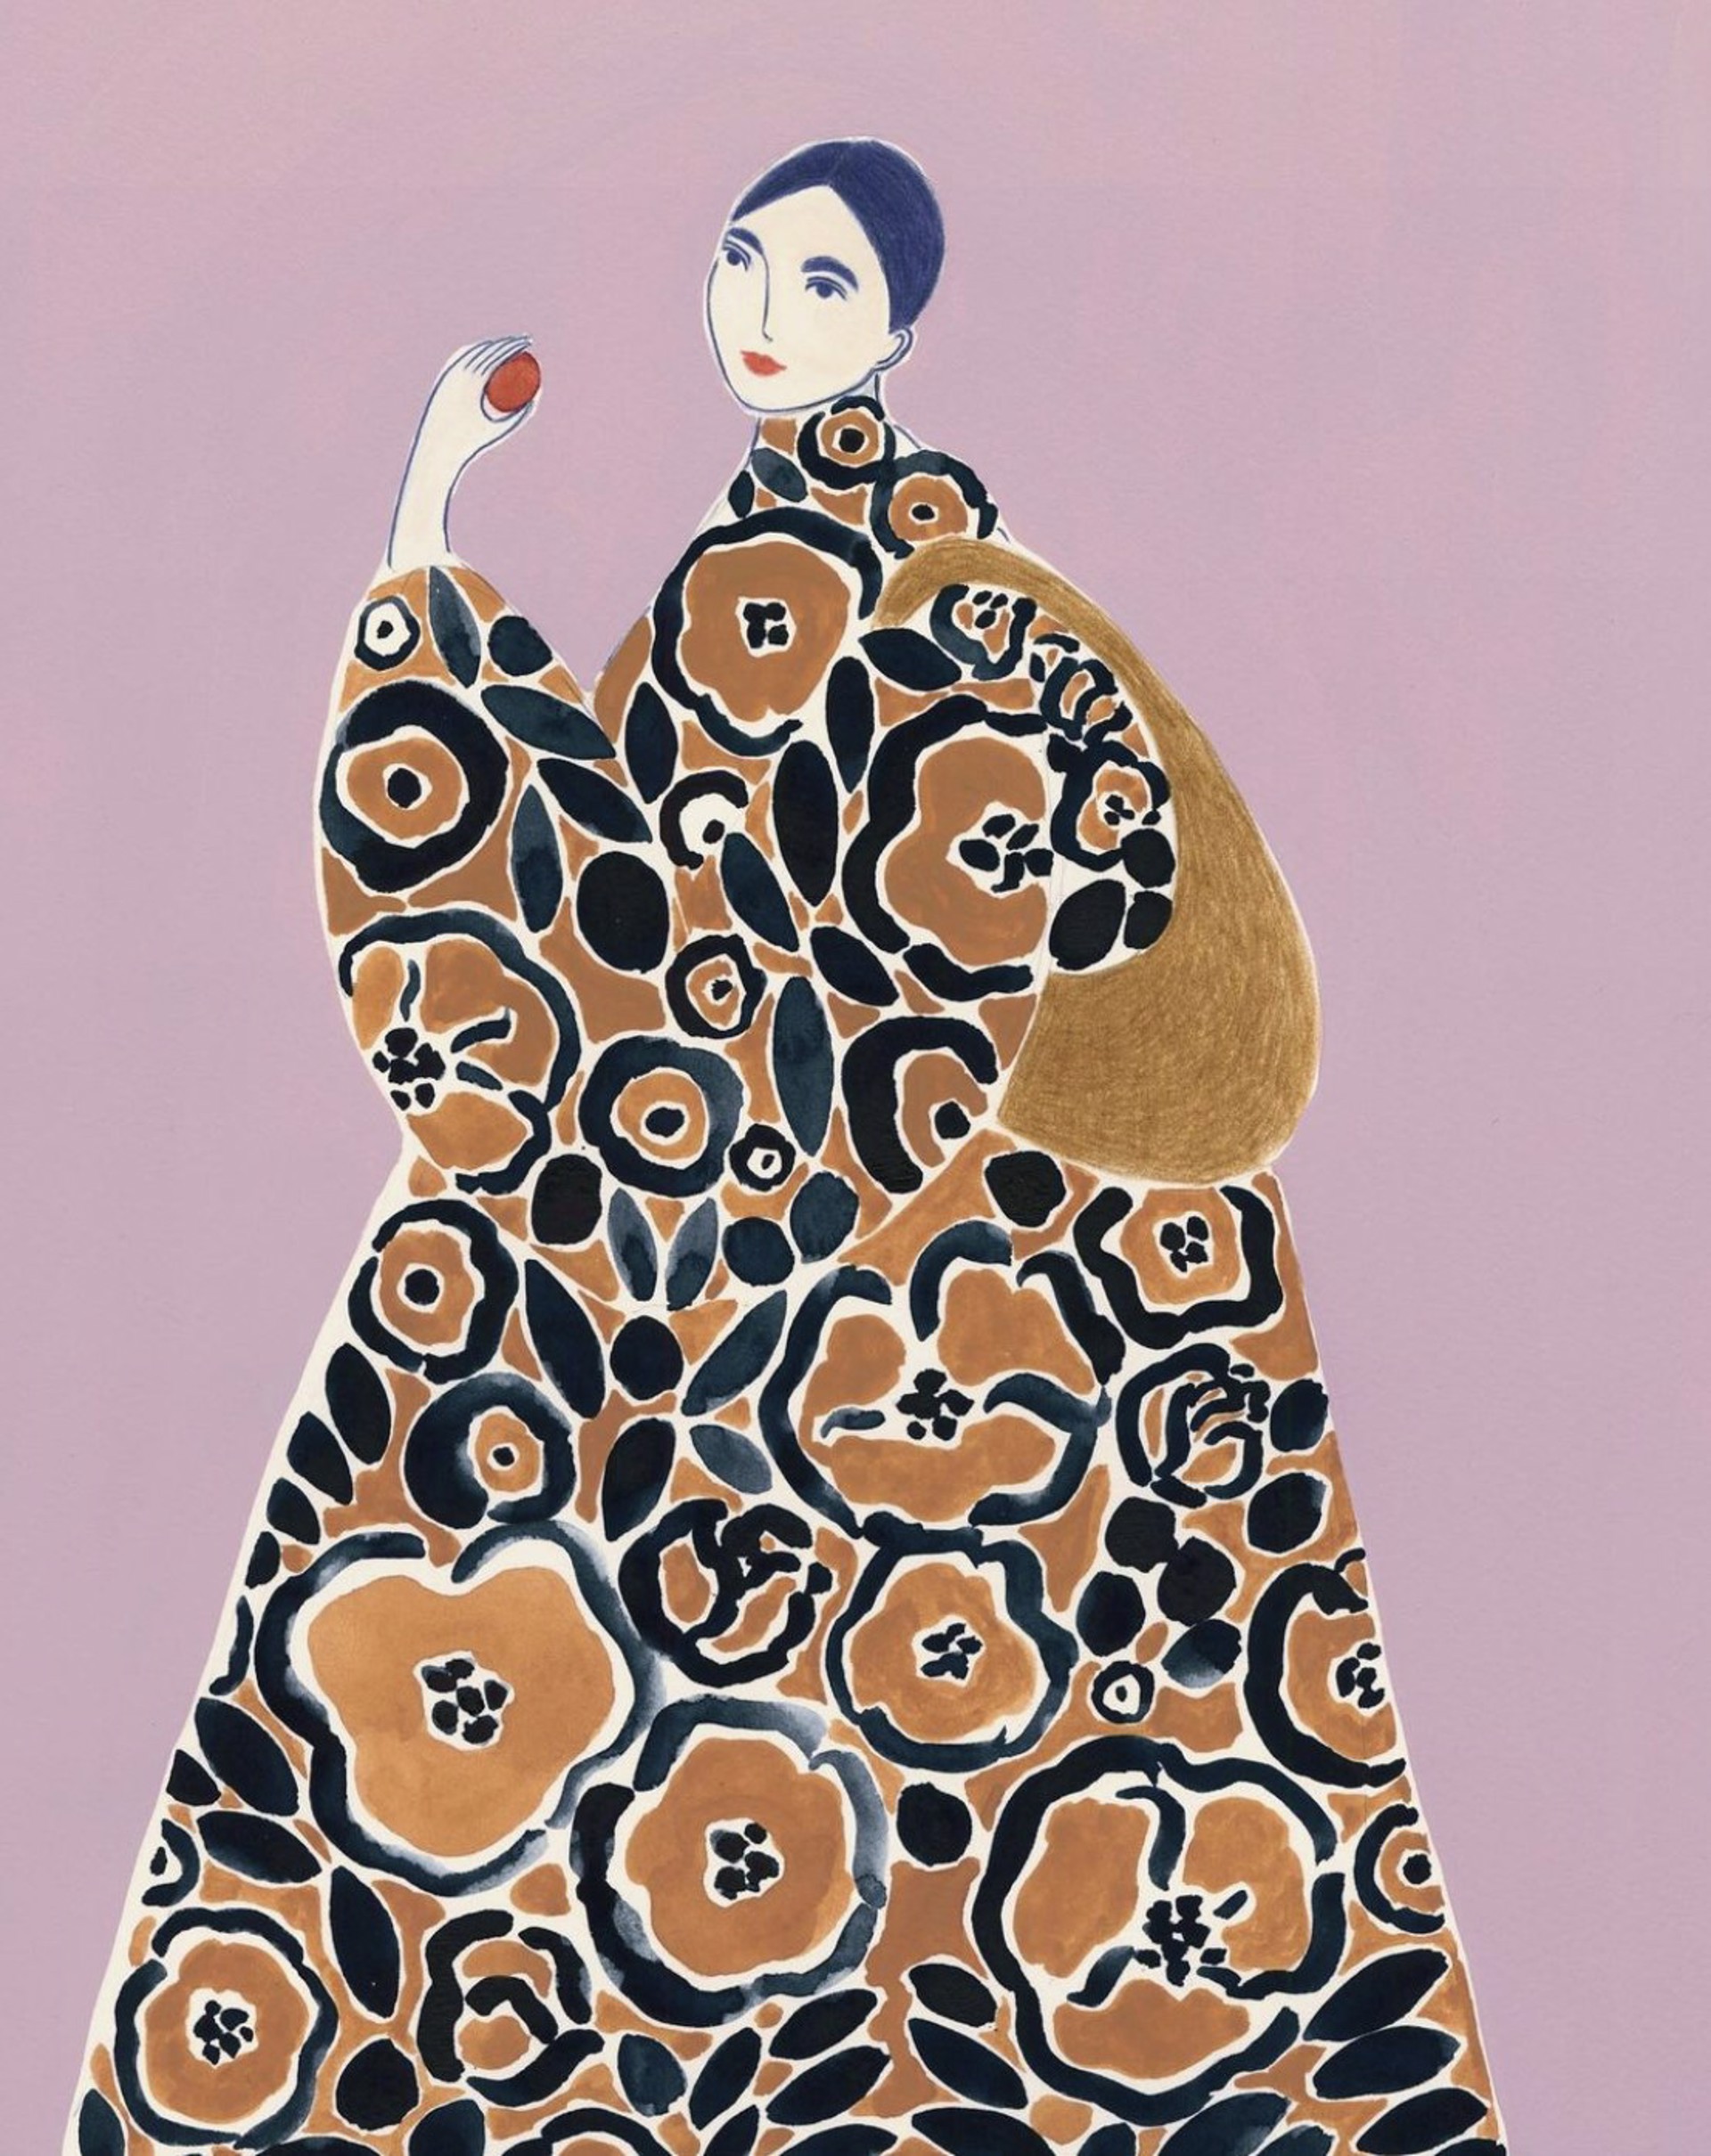 Flower Coat by Anine Cecilie Iversen